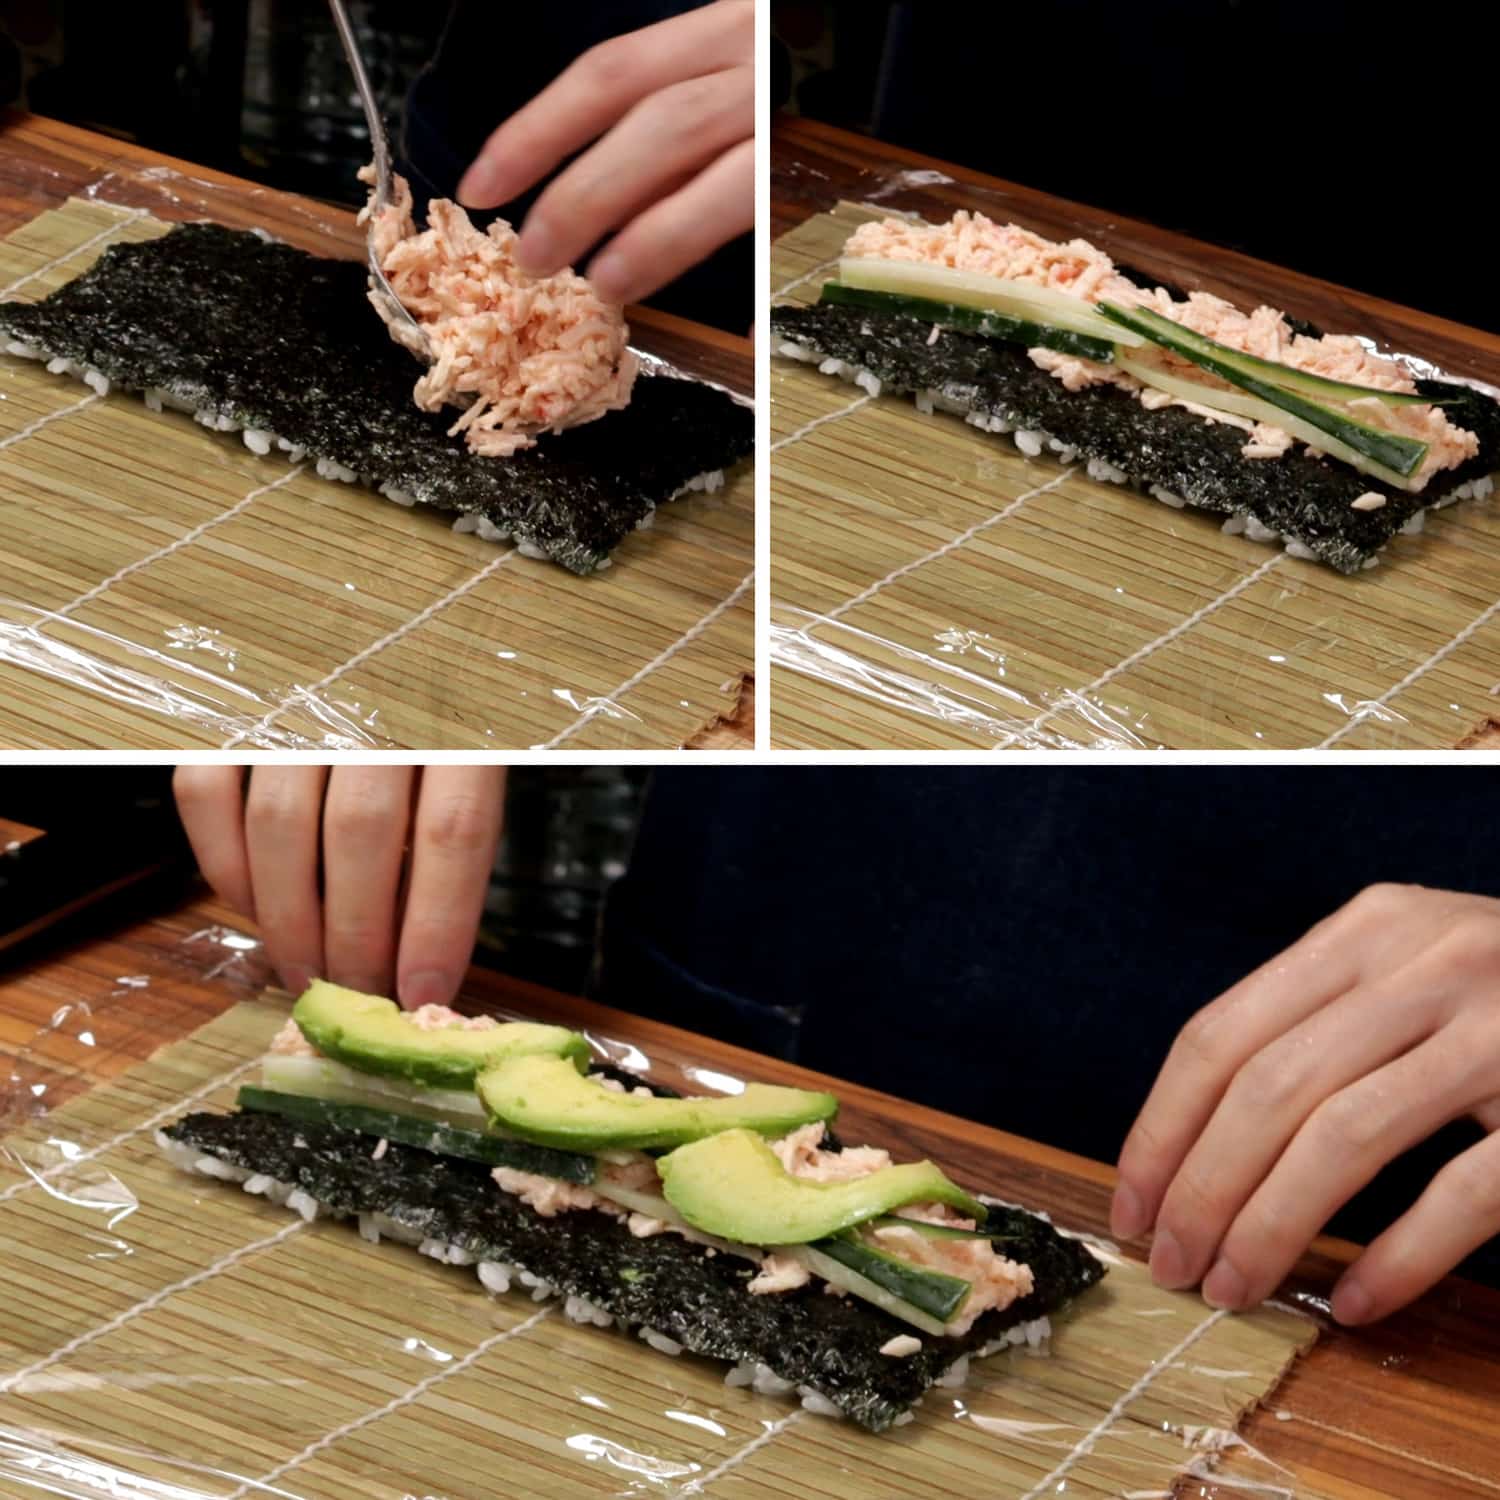 How to Make California Roll - Video and step-by-step photos